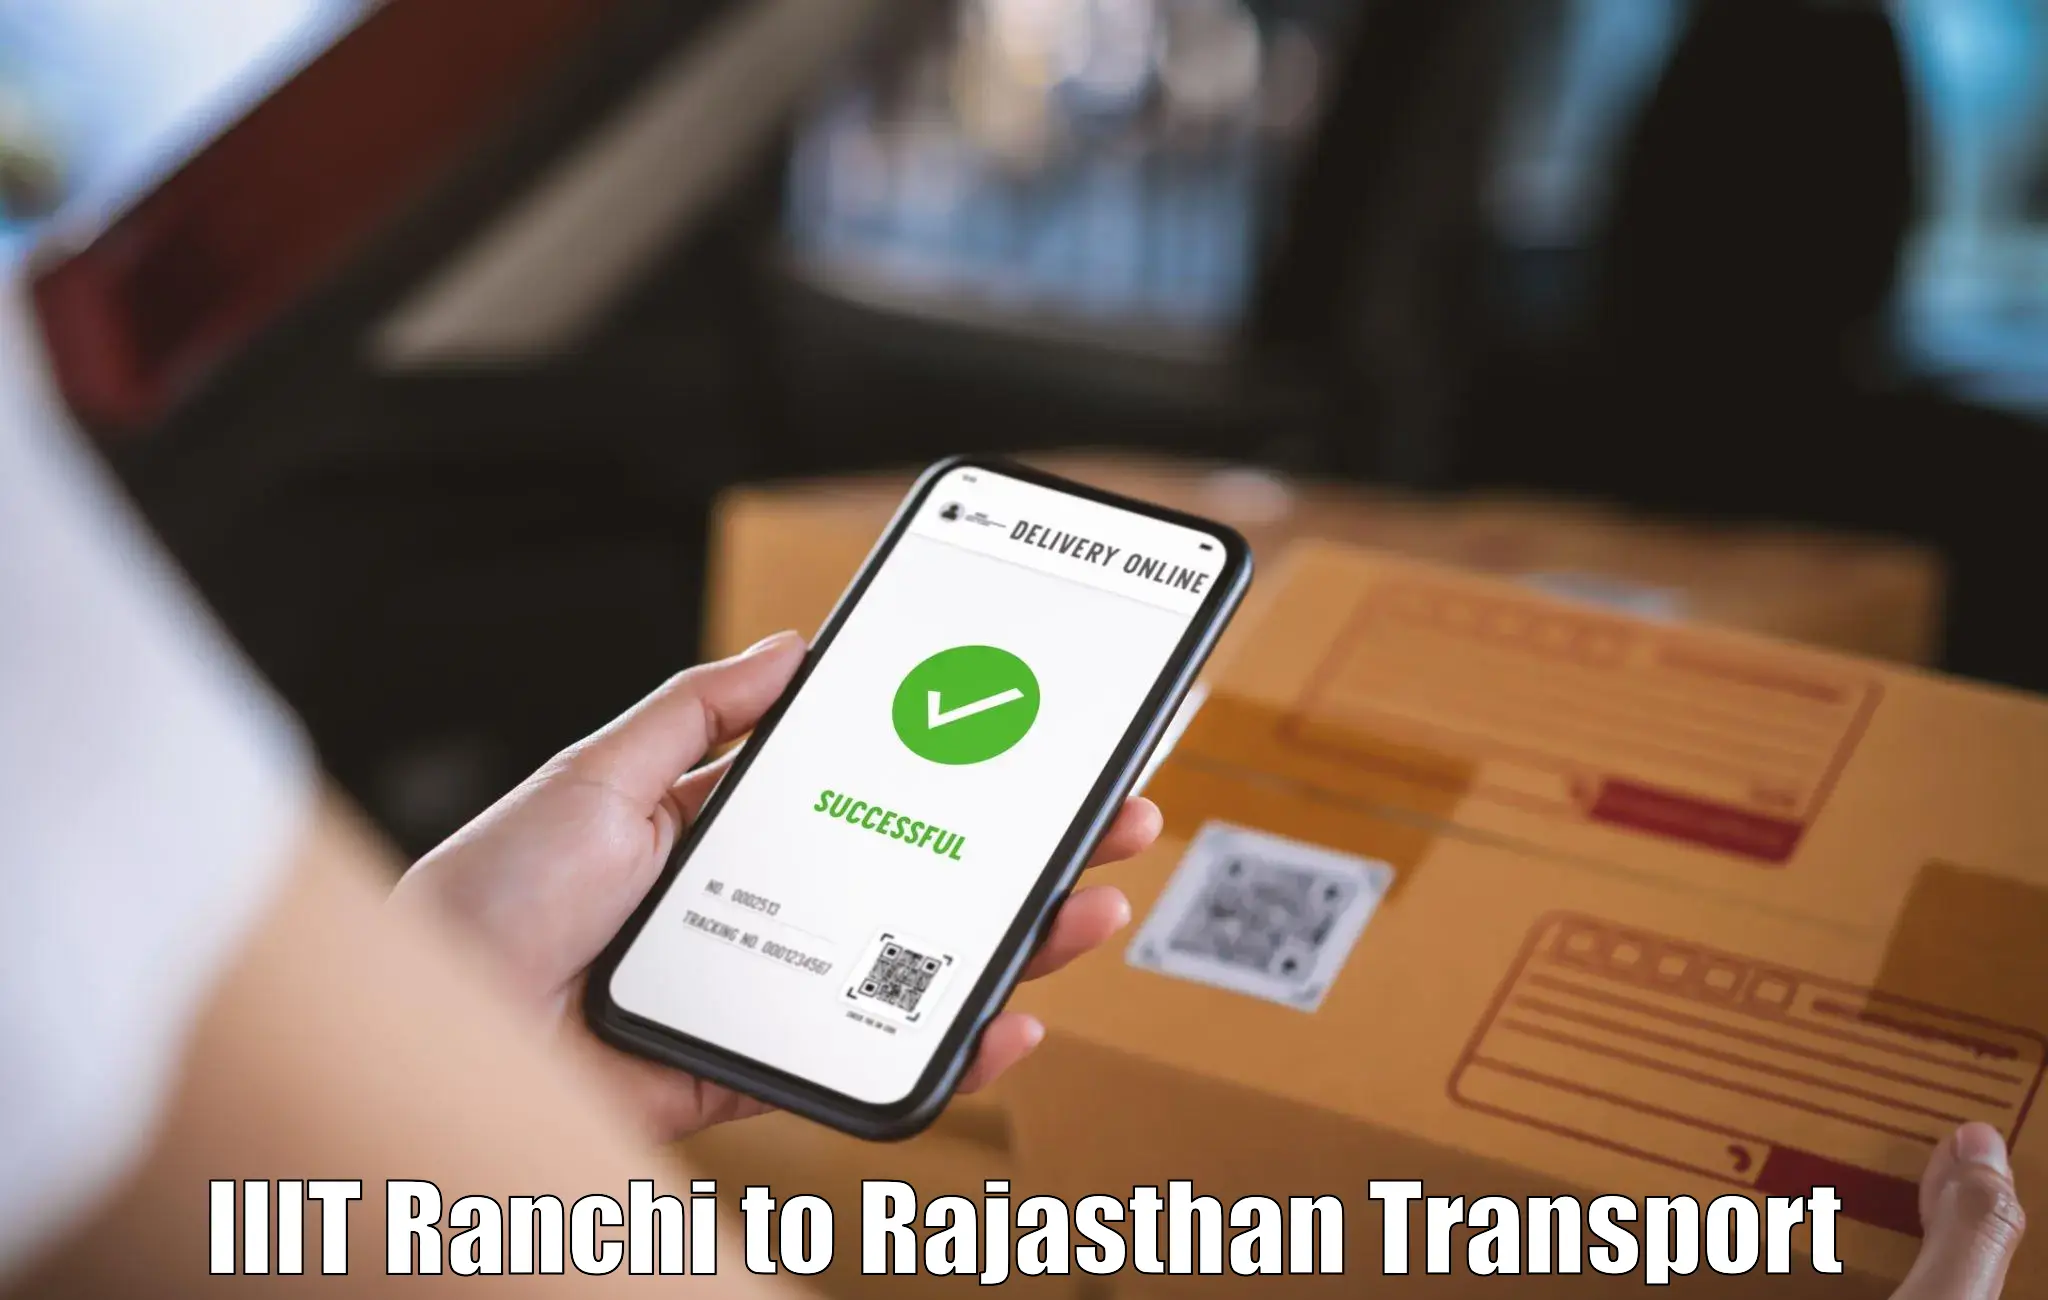 Express transport services IIIT Ranchi to Deenwa